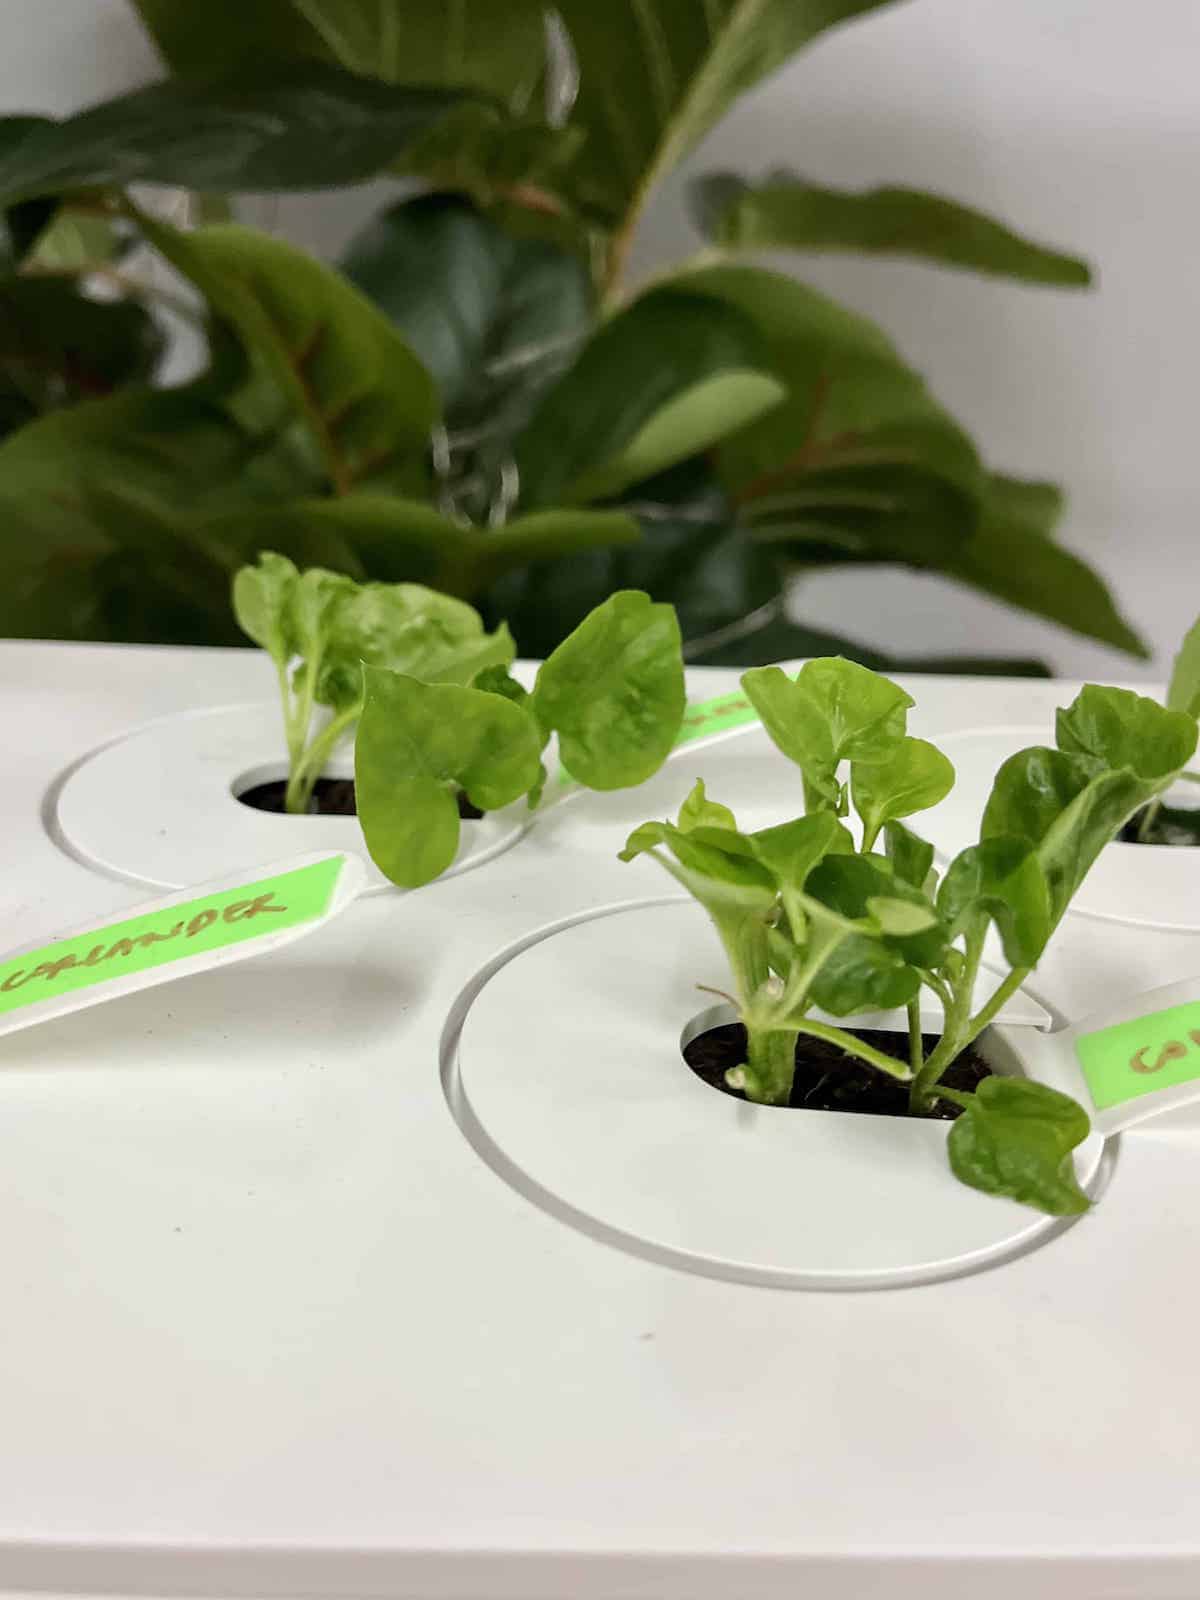 Brazilian Spinach cuttings in a Click & Grow Indoor Gardening Kit.